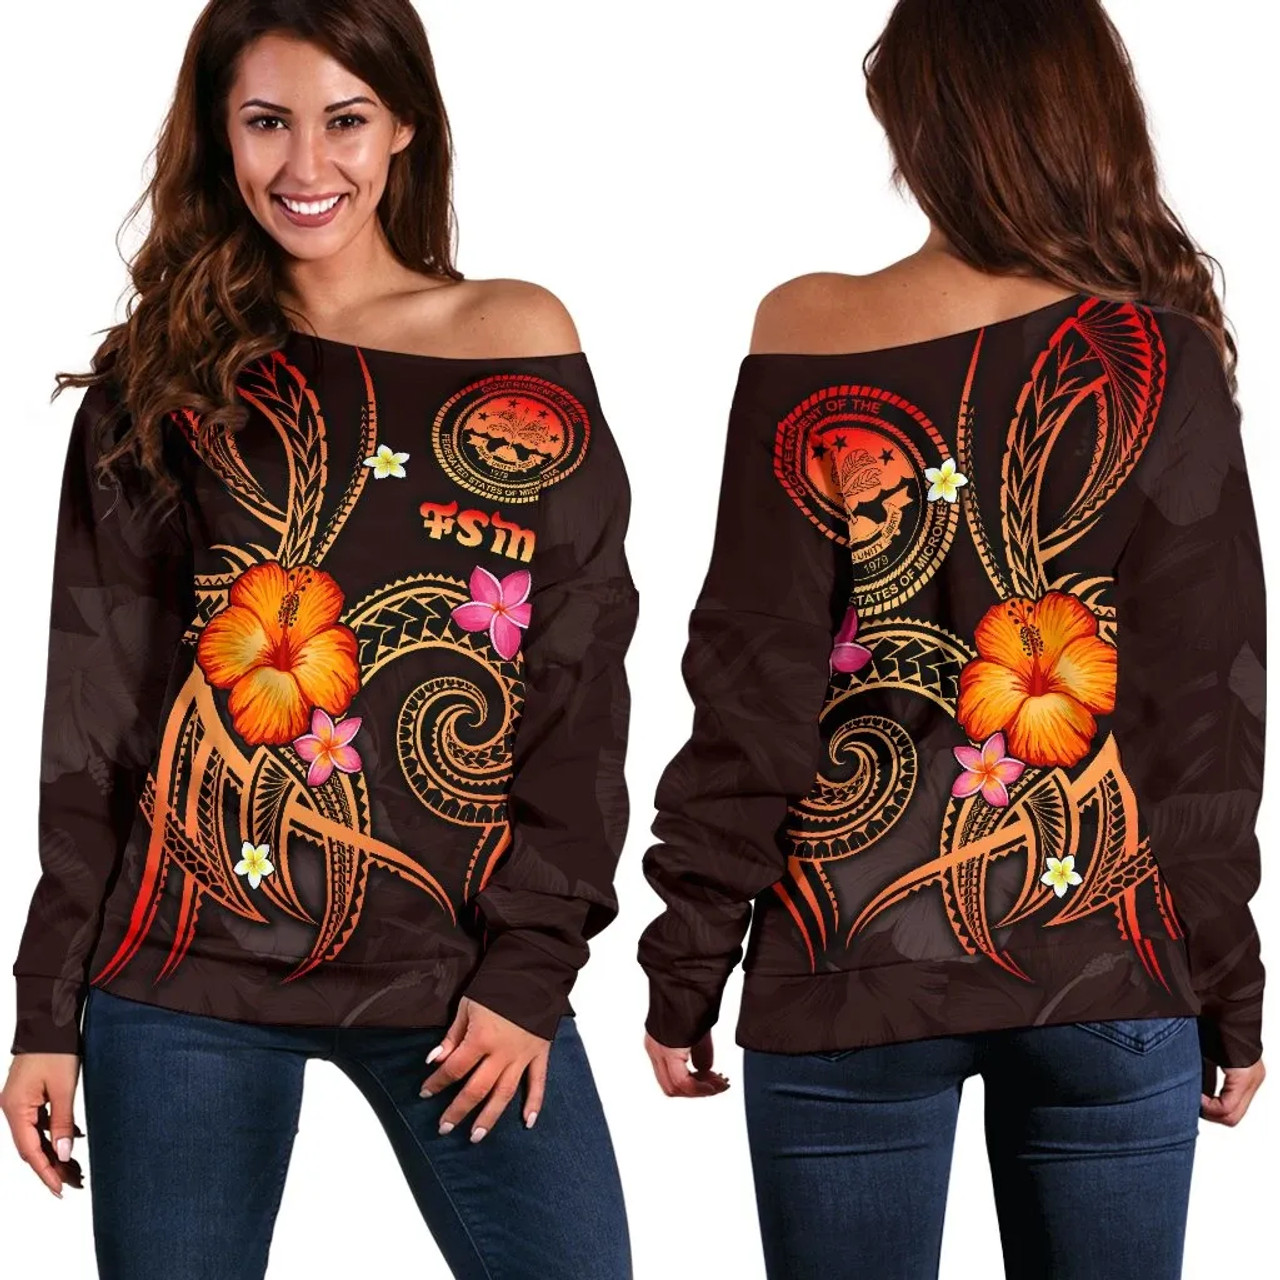 Federated States of Micronesia Polynesian Off Shoulder Sweater - Legend of FSM (Red) 2